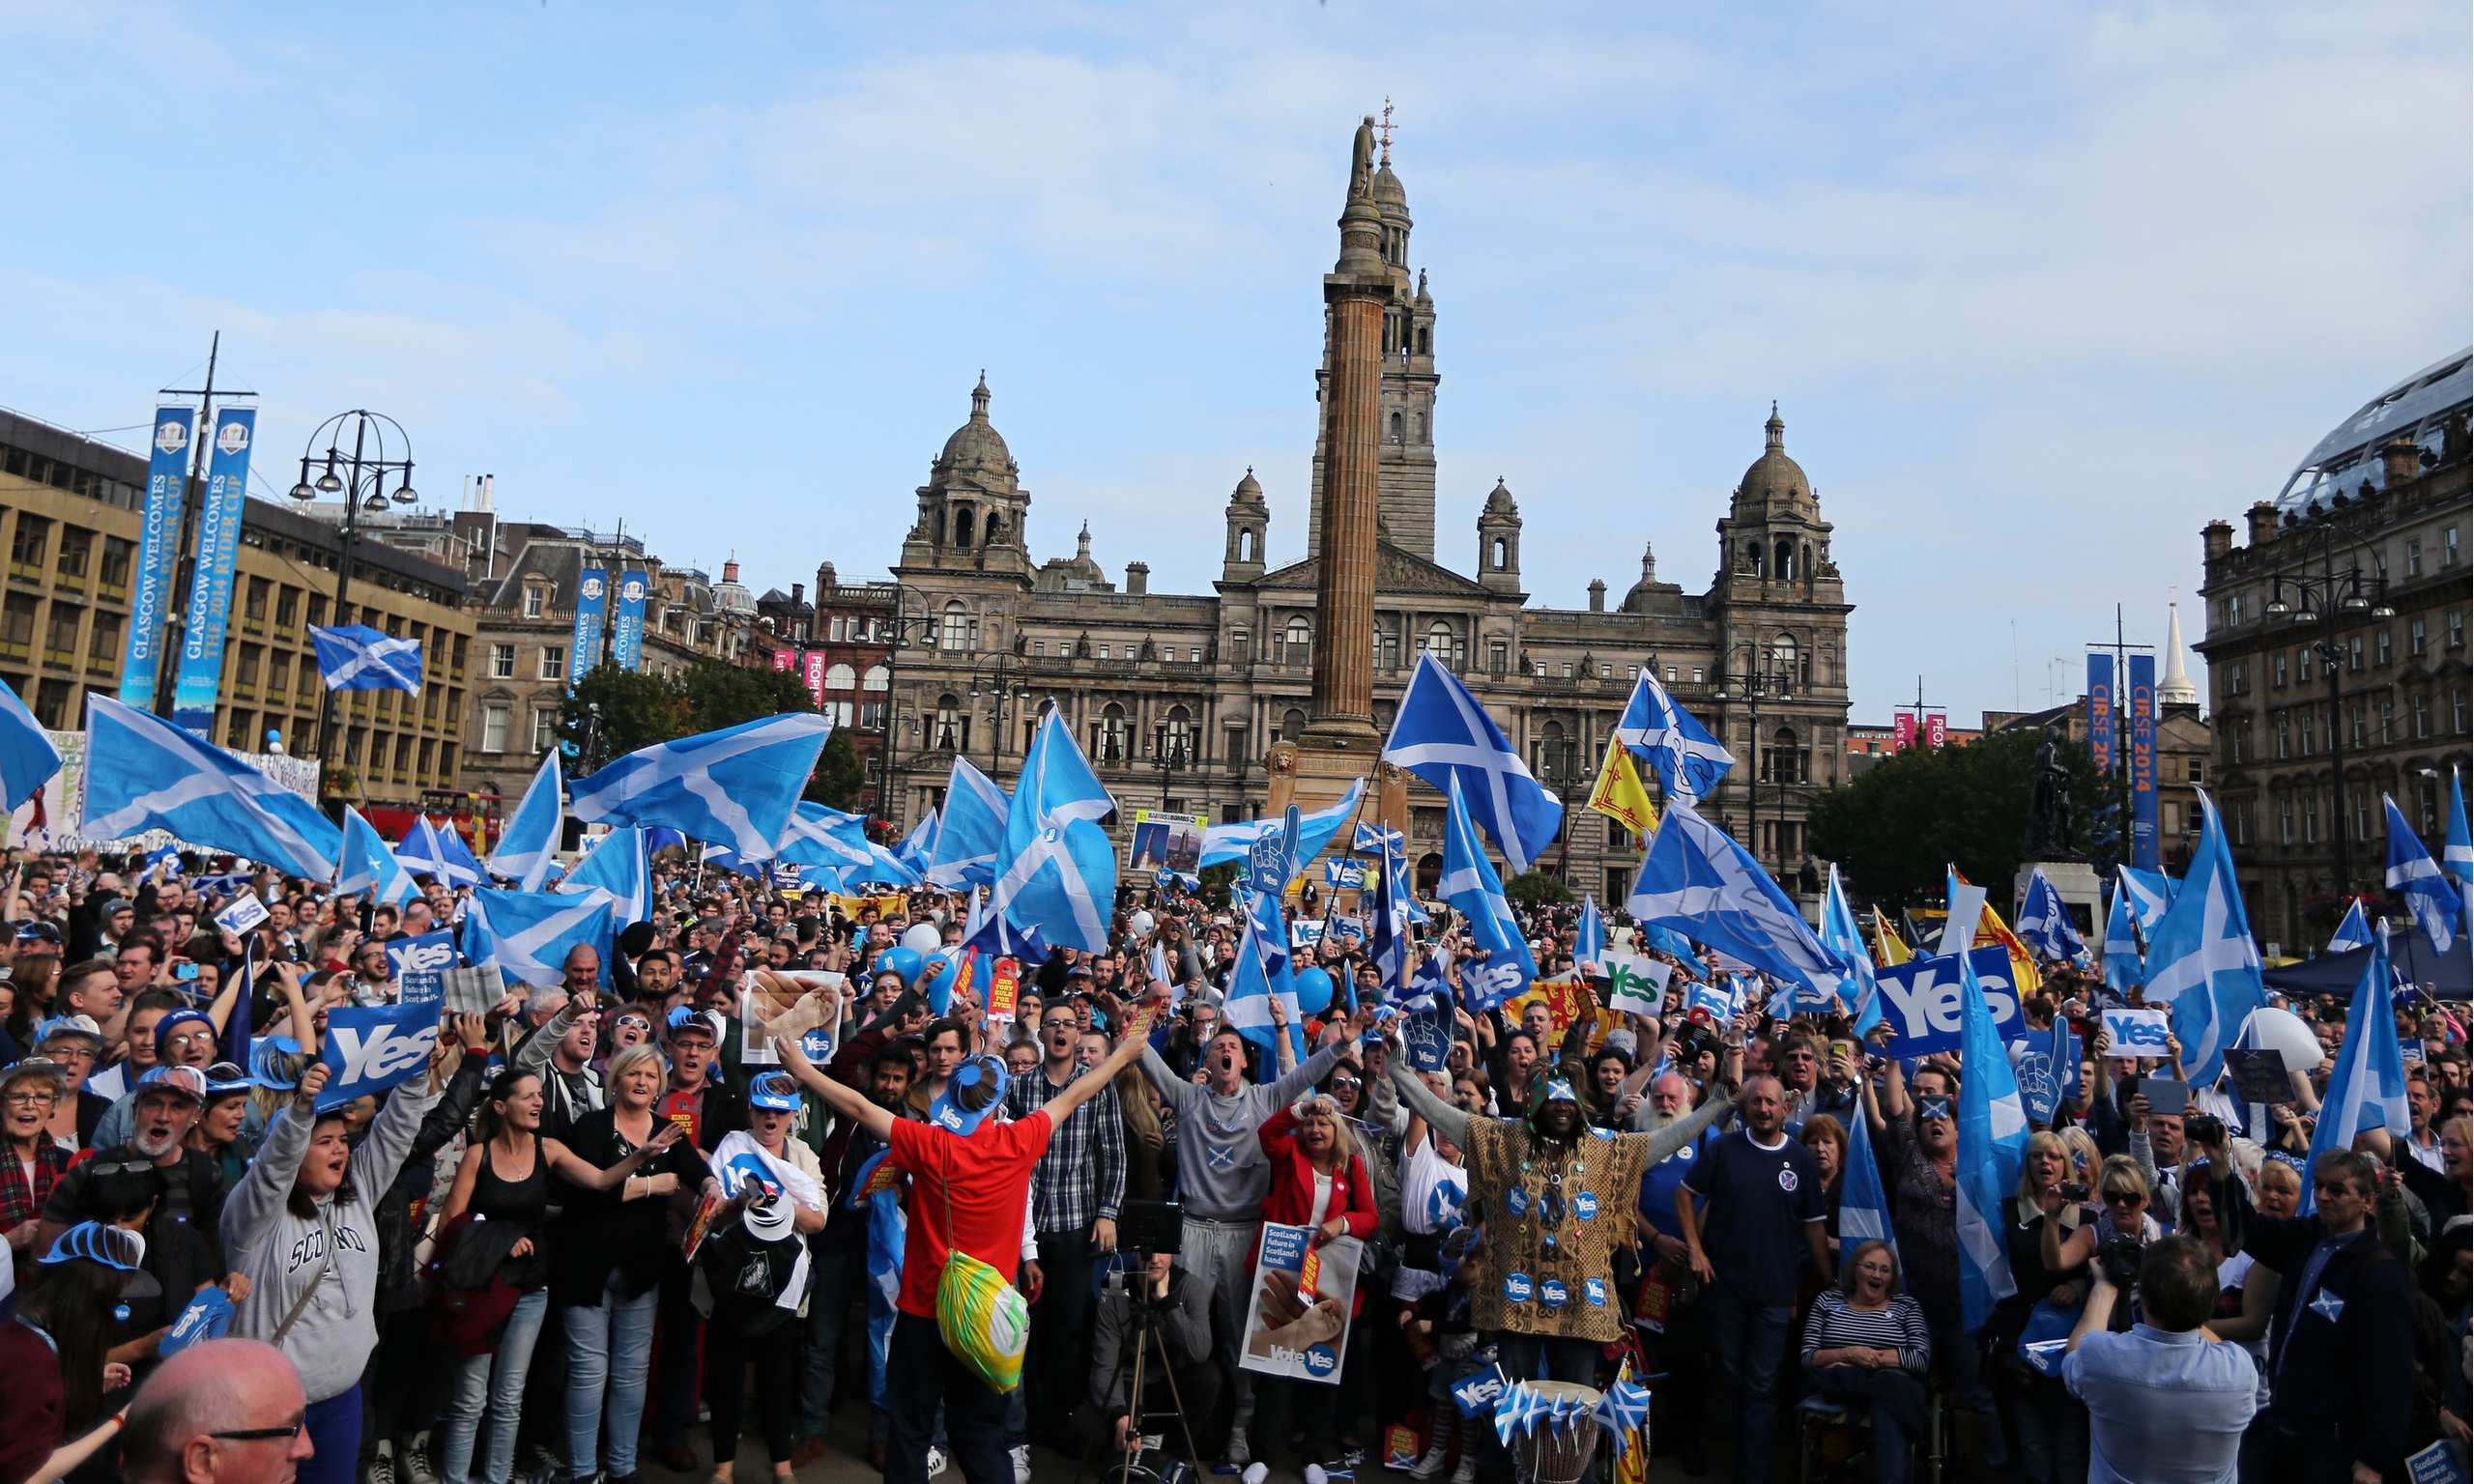 Scots' final call: can rallying beneath the radar save the day? | Politics | The Guardian